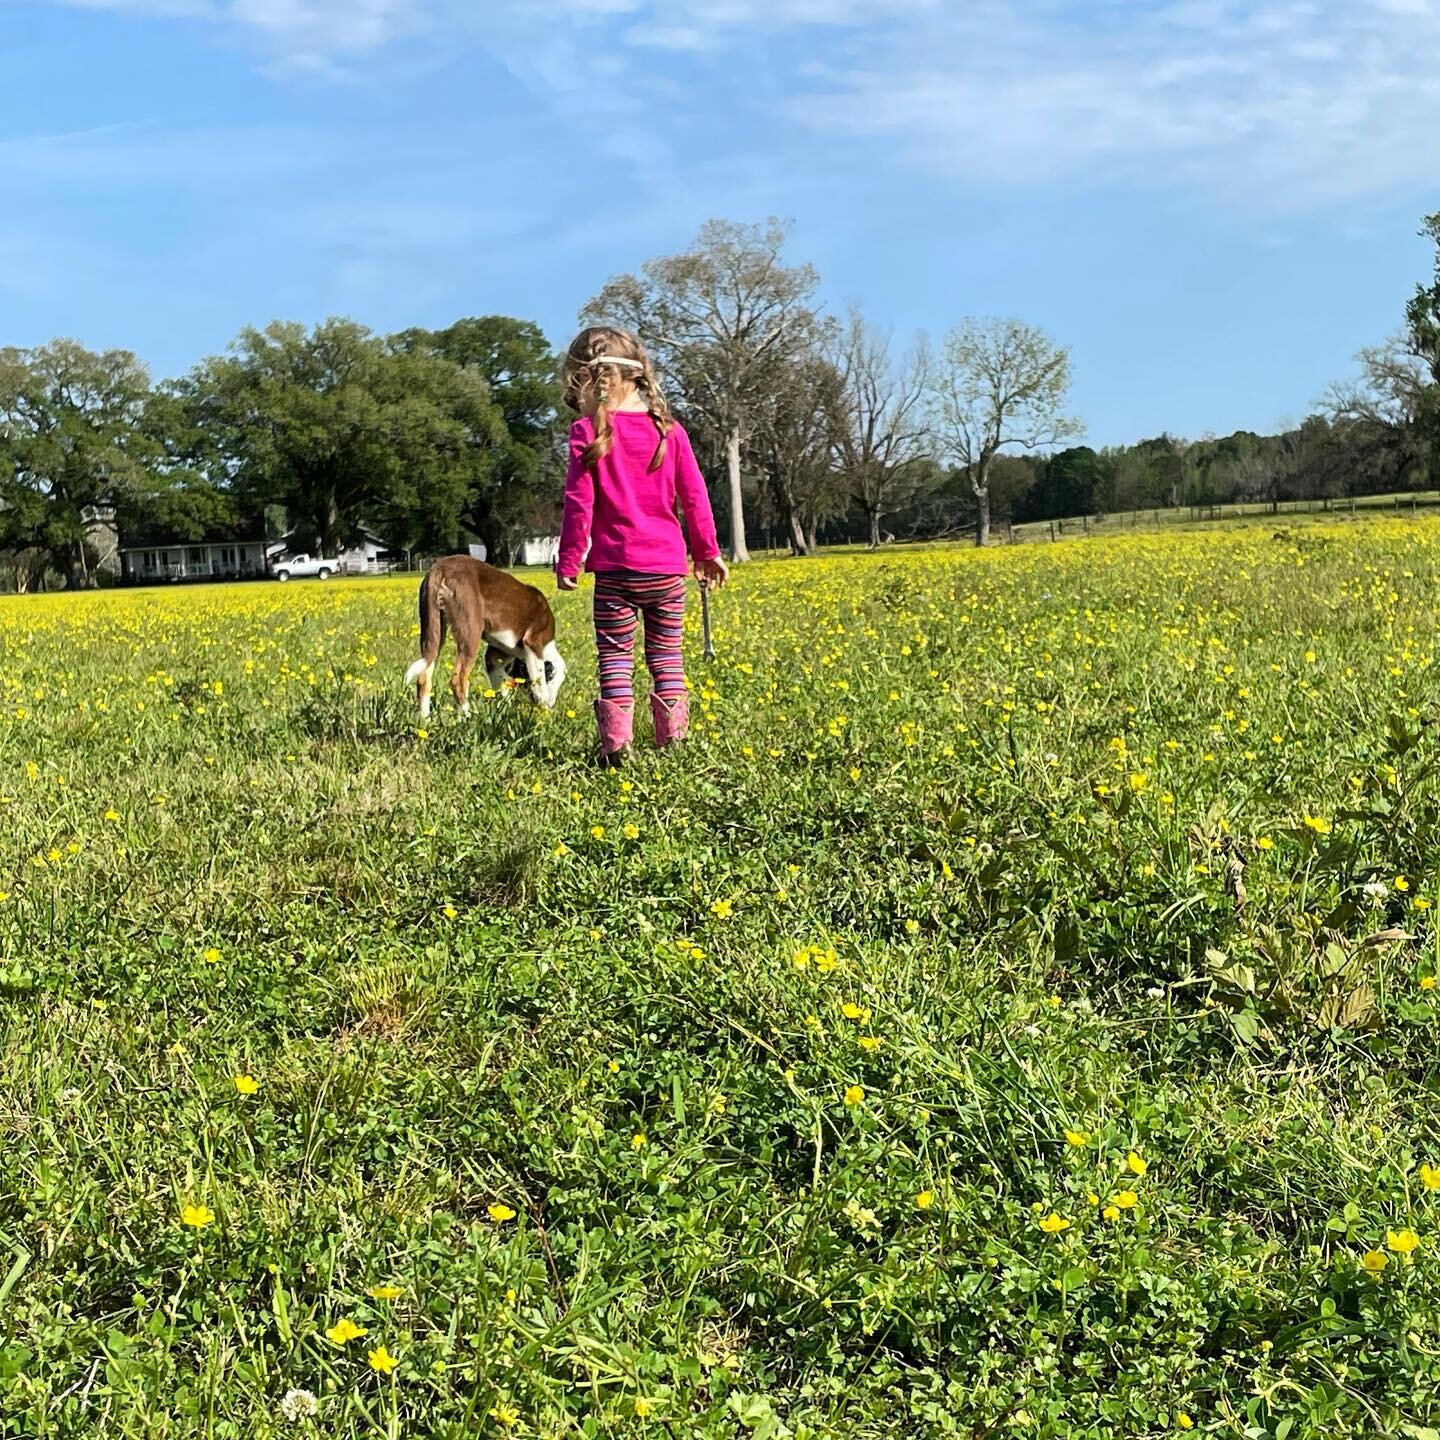 The smallest farmer of our crew and her puppy were checking the #perennialpeanut fields with me earlier this week. Needless to say, she loves our #farmlife, being #outdoors, and all of her animals. We love that she loves all of those things! 

#famil